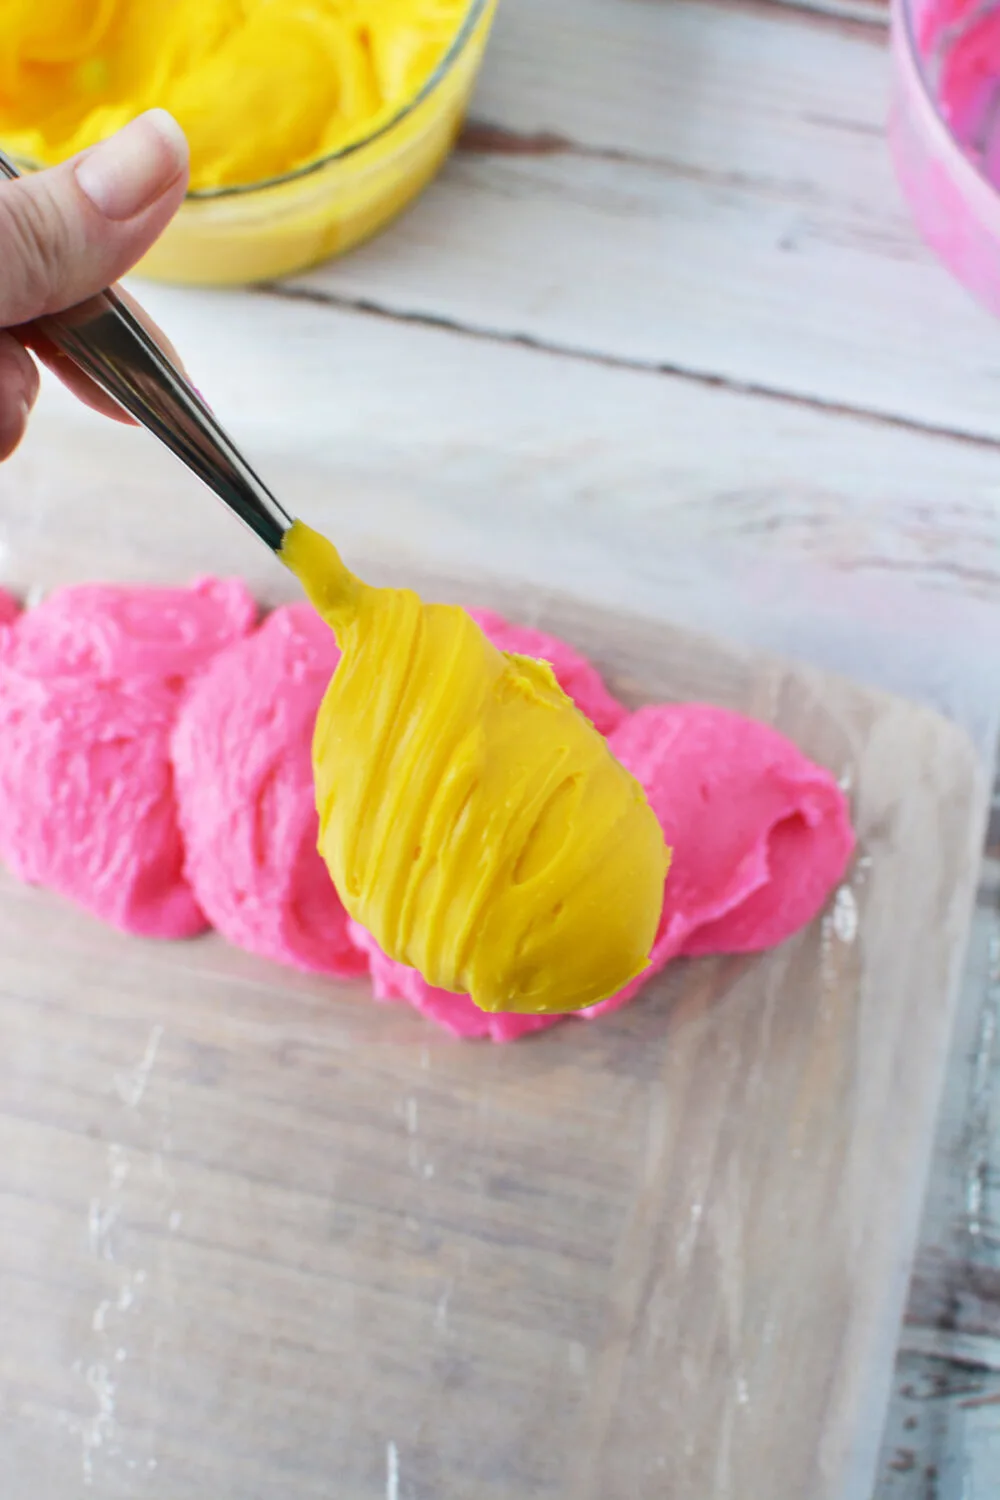 Adding different colors of fudge to a piping bag.